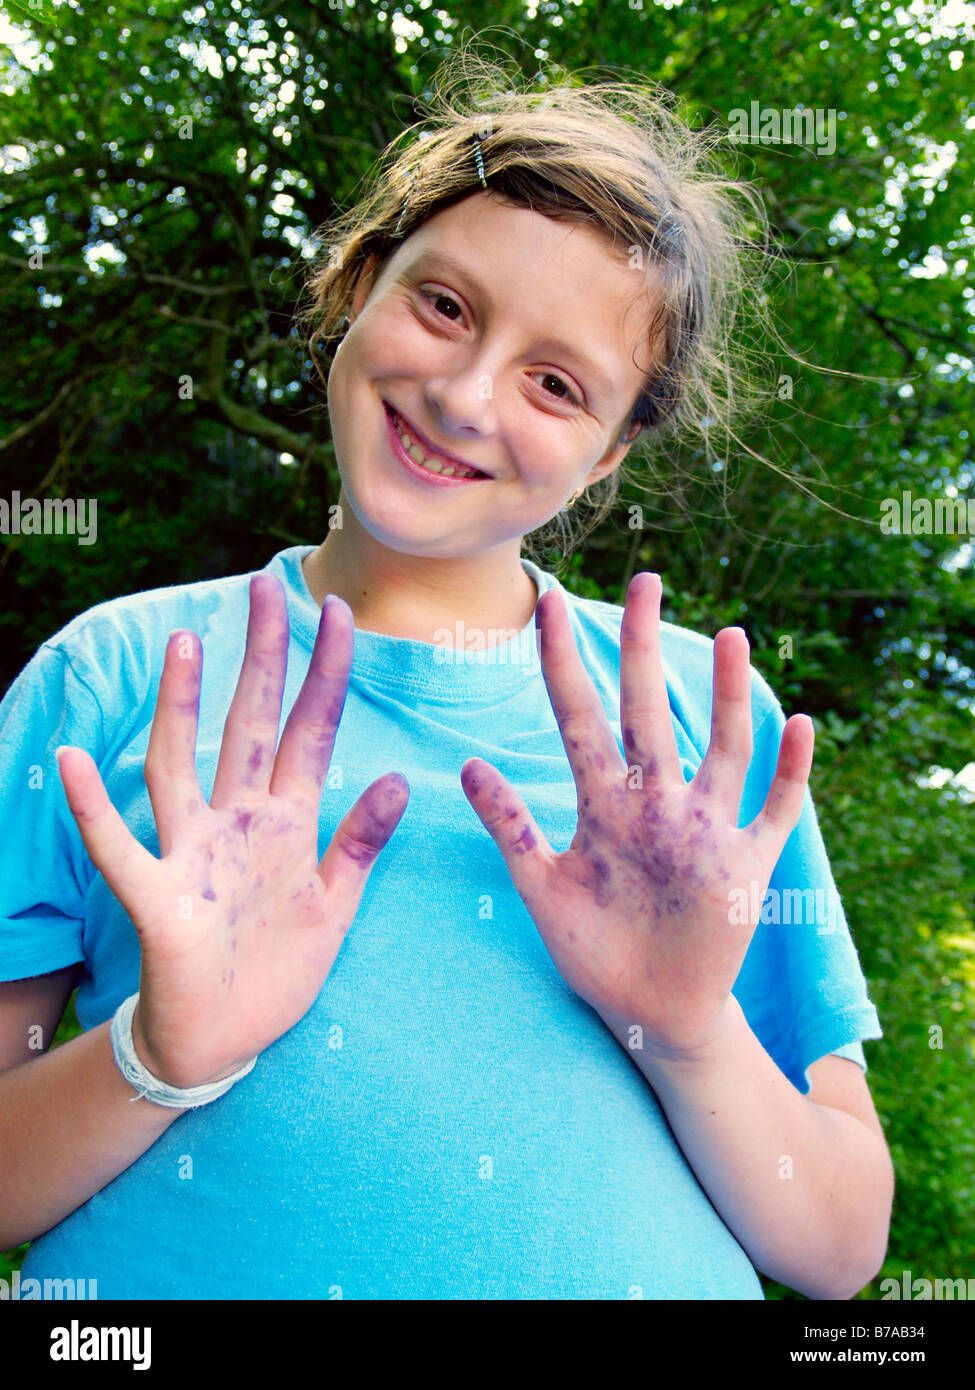 13 year old girl with blue colored hands from blueberries Stock Photo